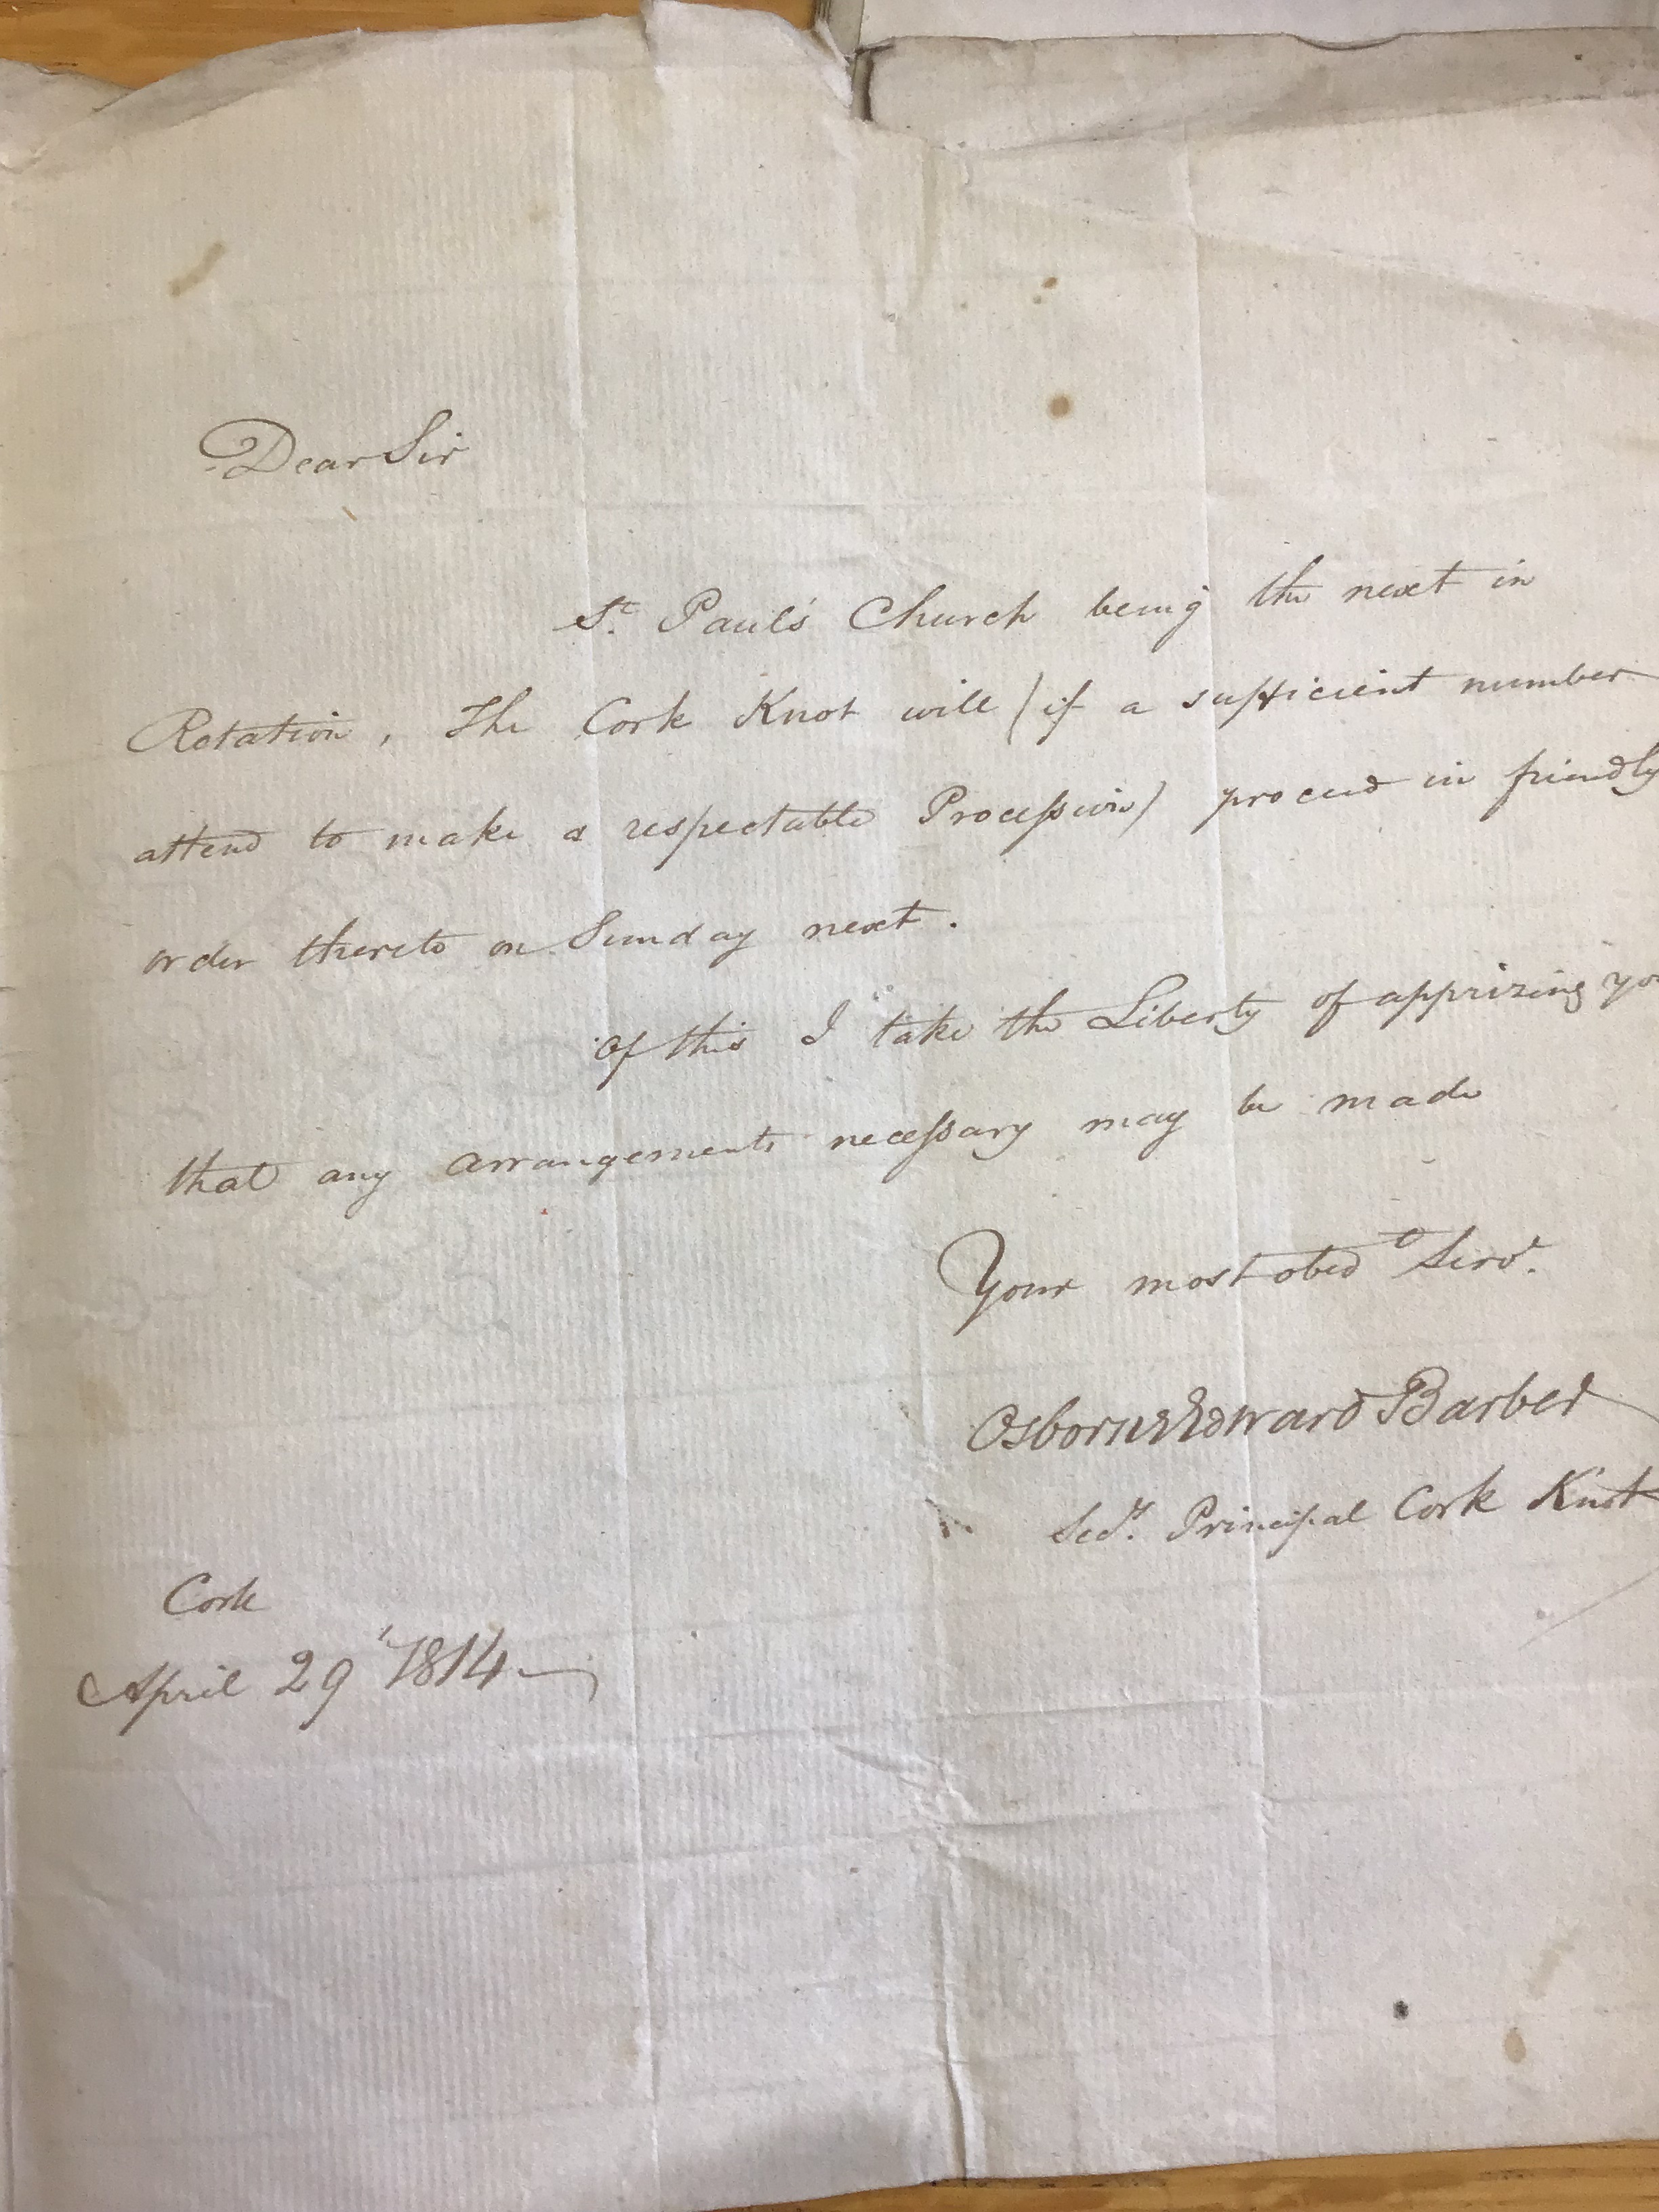 A letter from Osborne Edward Barber, Second Principal, Cork Knot, presumably to the rector, dated 29 April 1814.